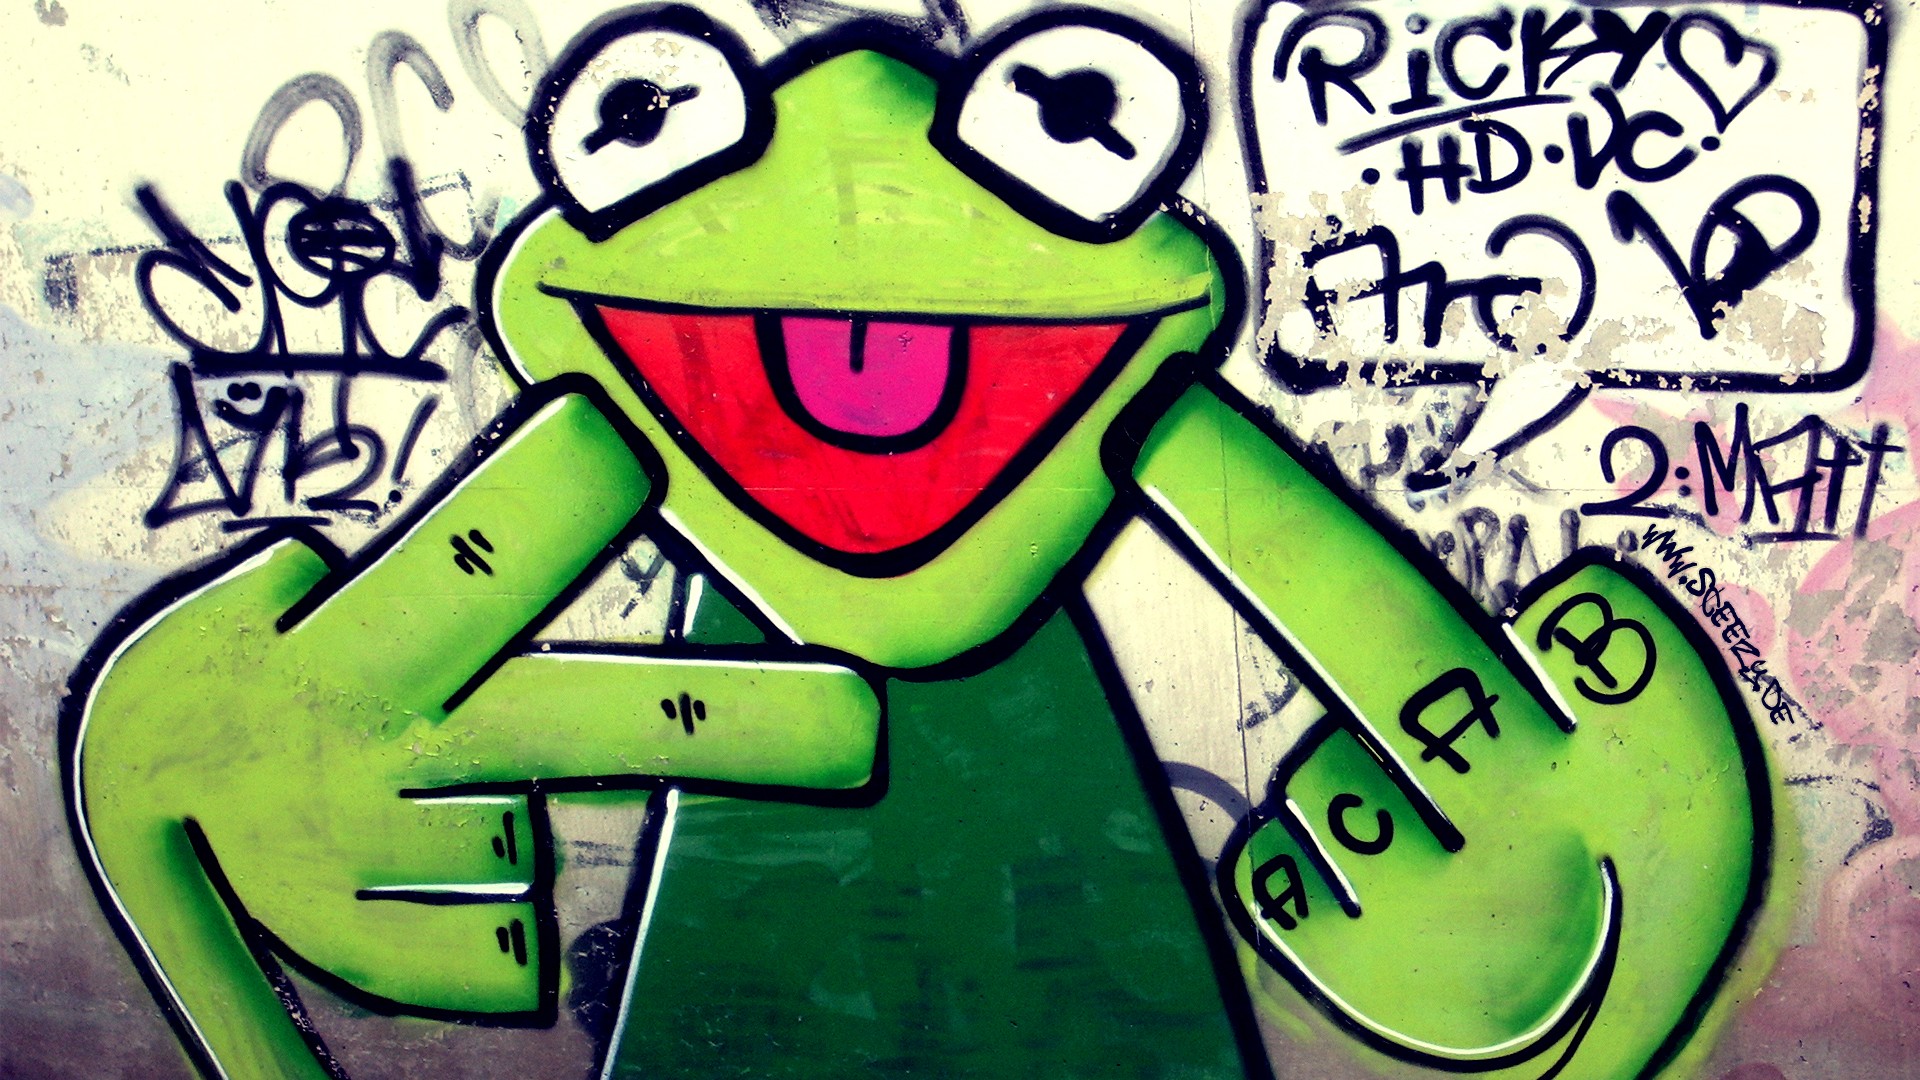 Graffiti Tag Desktop Wallpaper with image resolution 1920x1080 pixel. You can use this wallpaper as background for your desktop Computer Screensavers, Android or iPhone smartphones